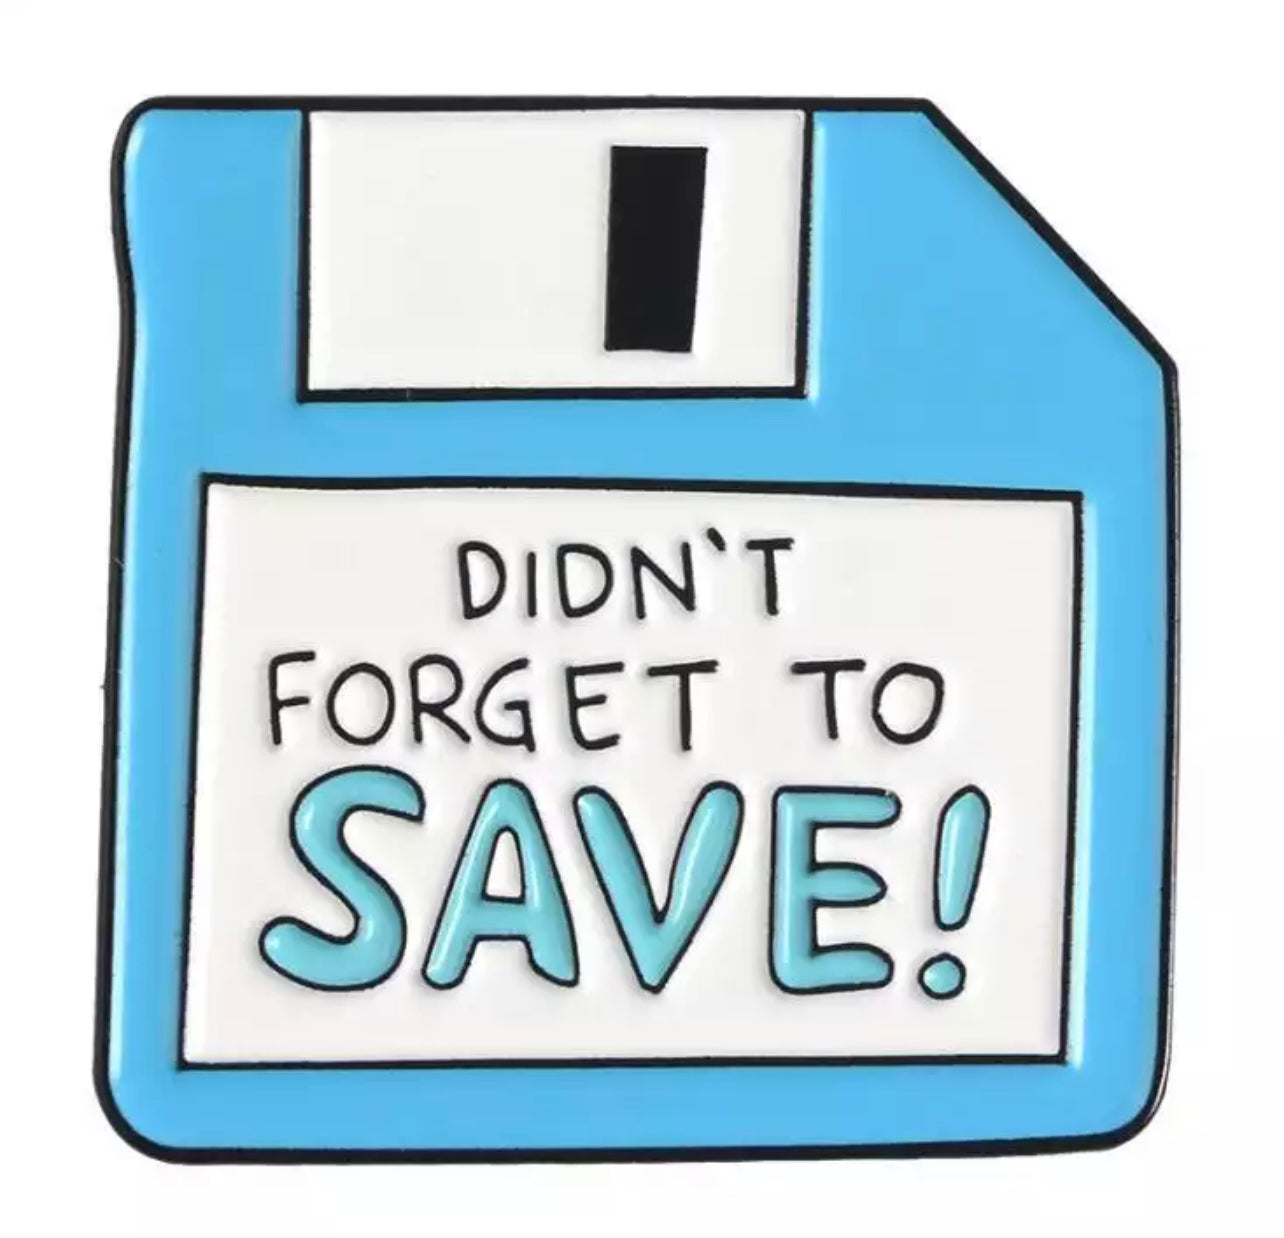 Didn’t forget to SAVE